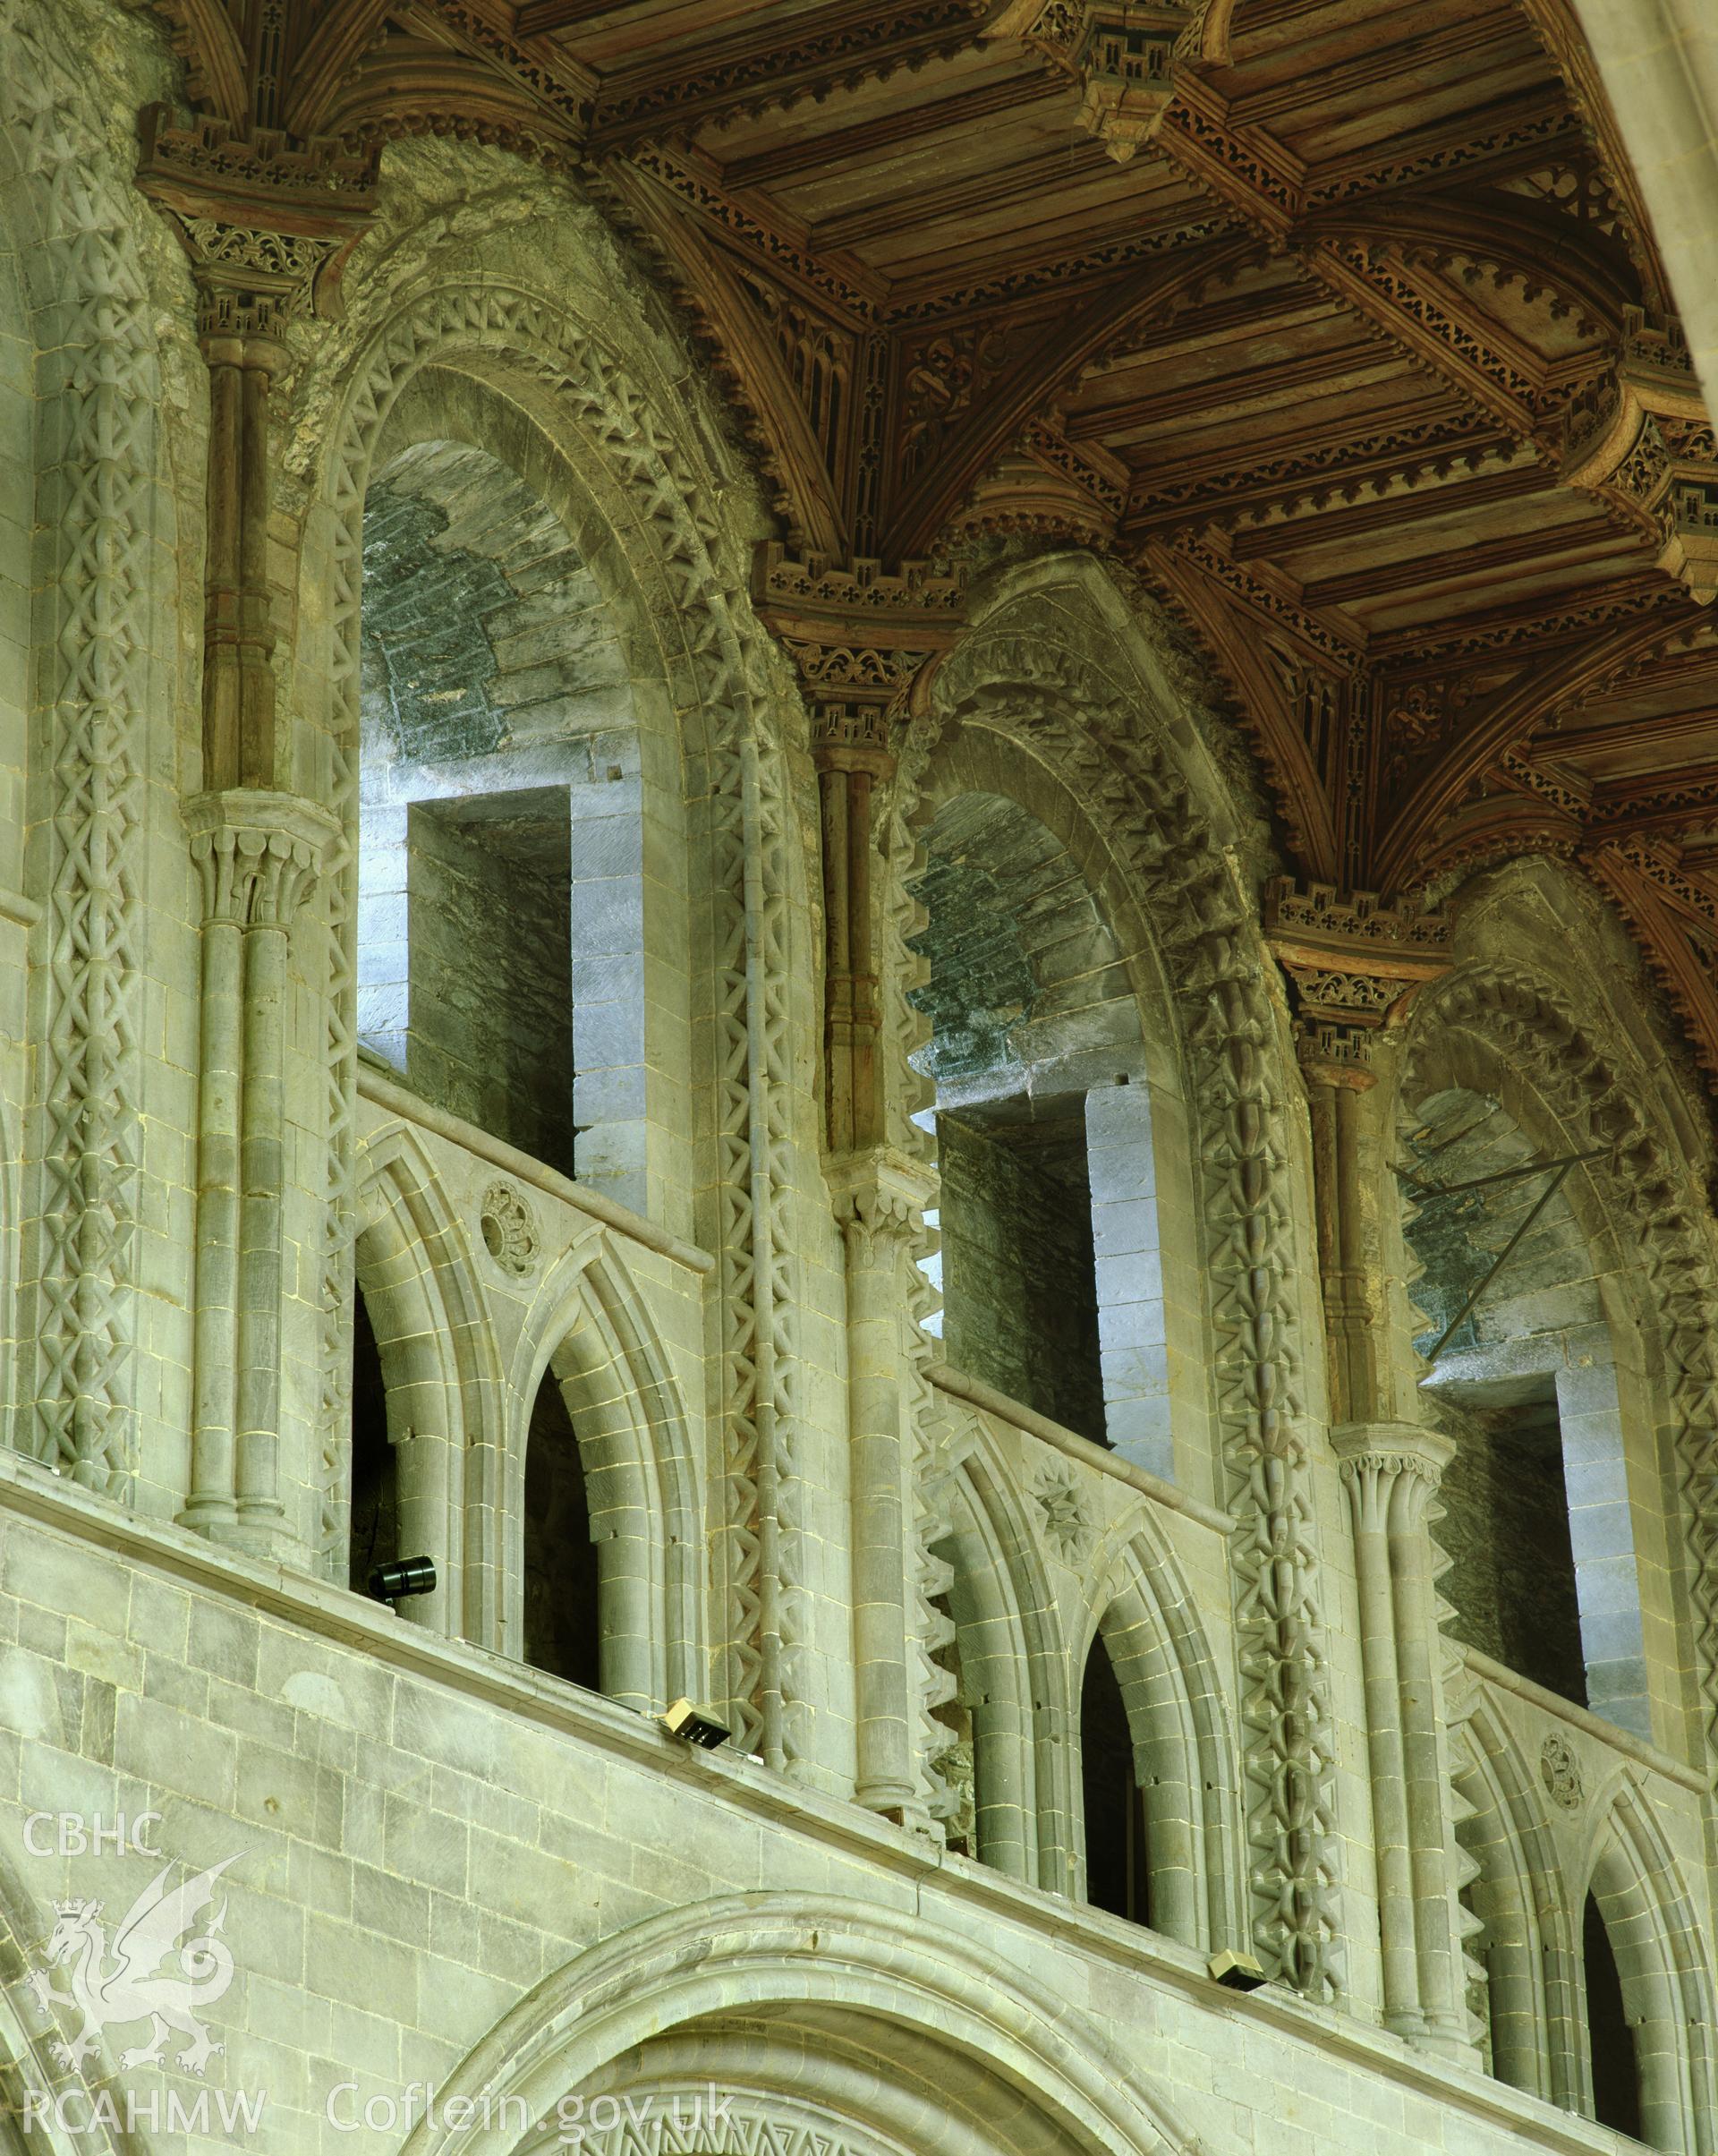 RCAHMW colour transparency showing the windows in the clerestory, St Davids Cathedral, taken by Iain Wright, 2003.